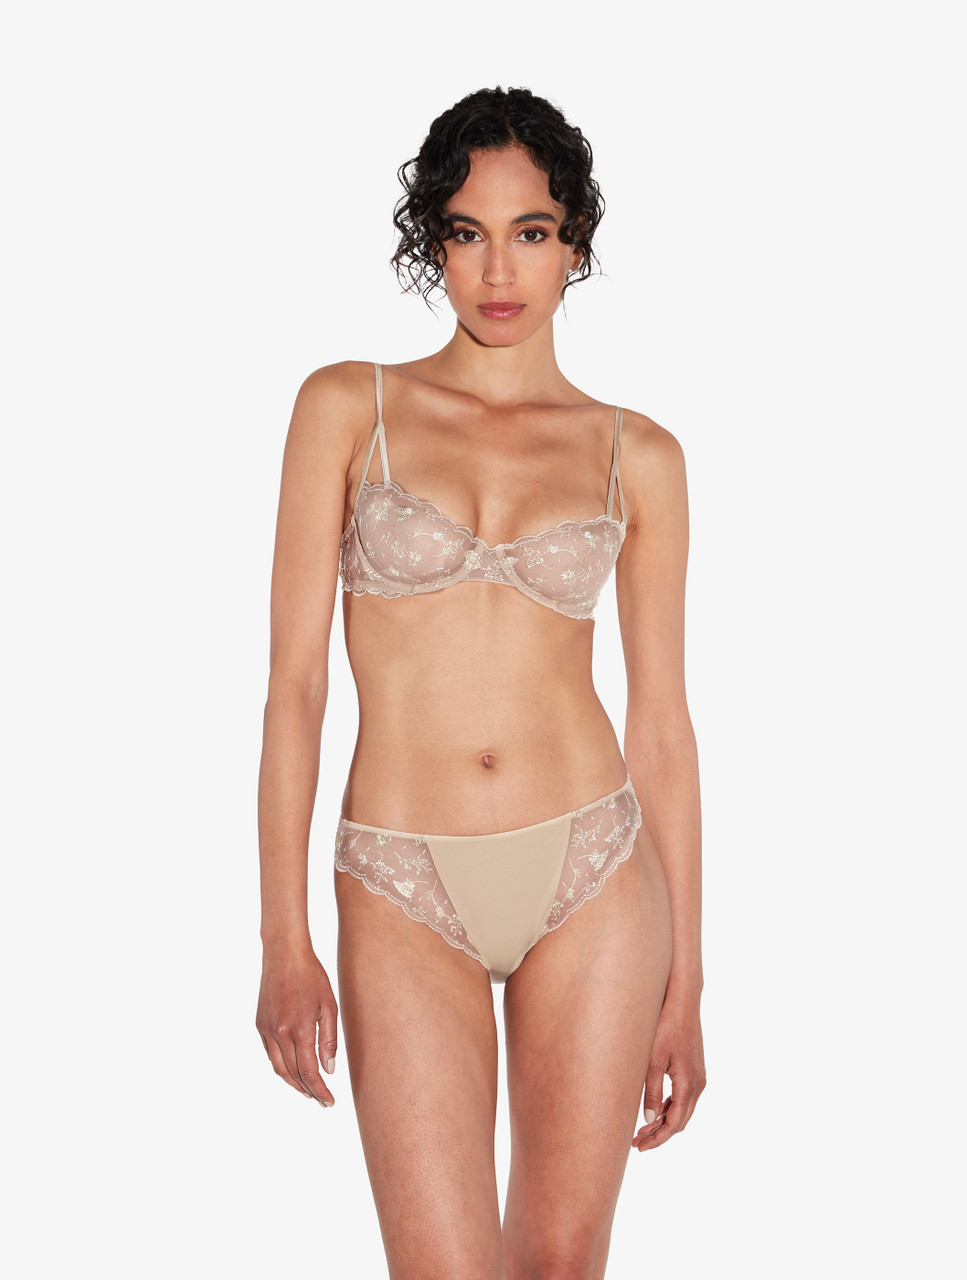 Underwired Bra in Halo and Ivory Nude with embroidered tulle